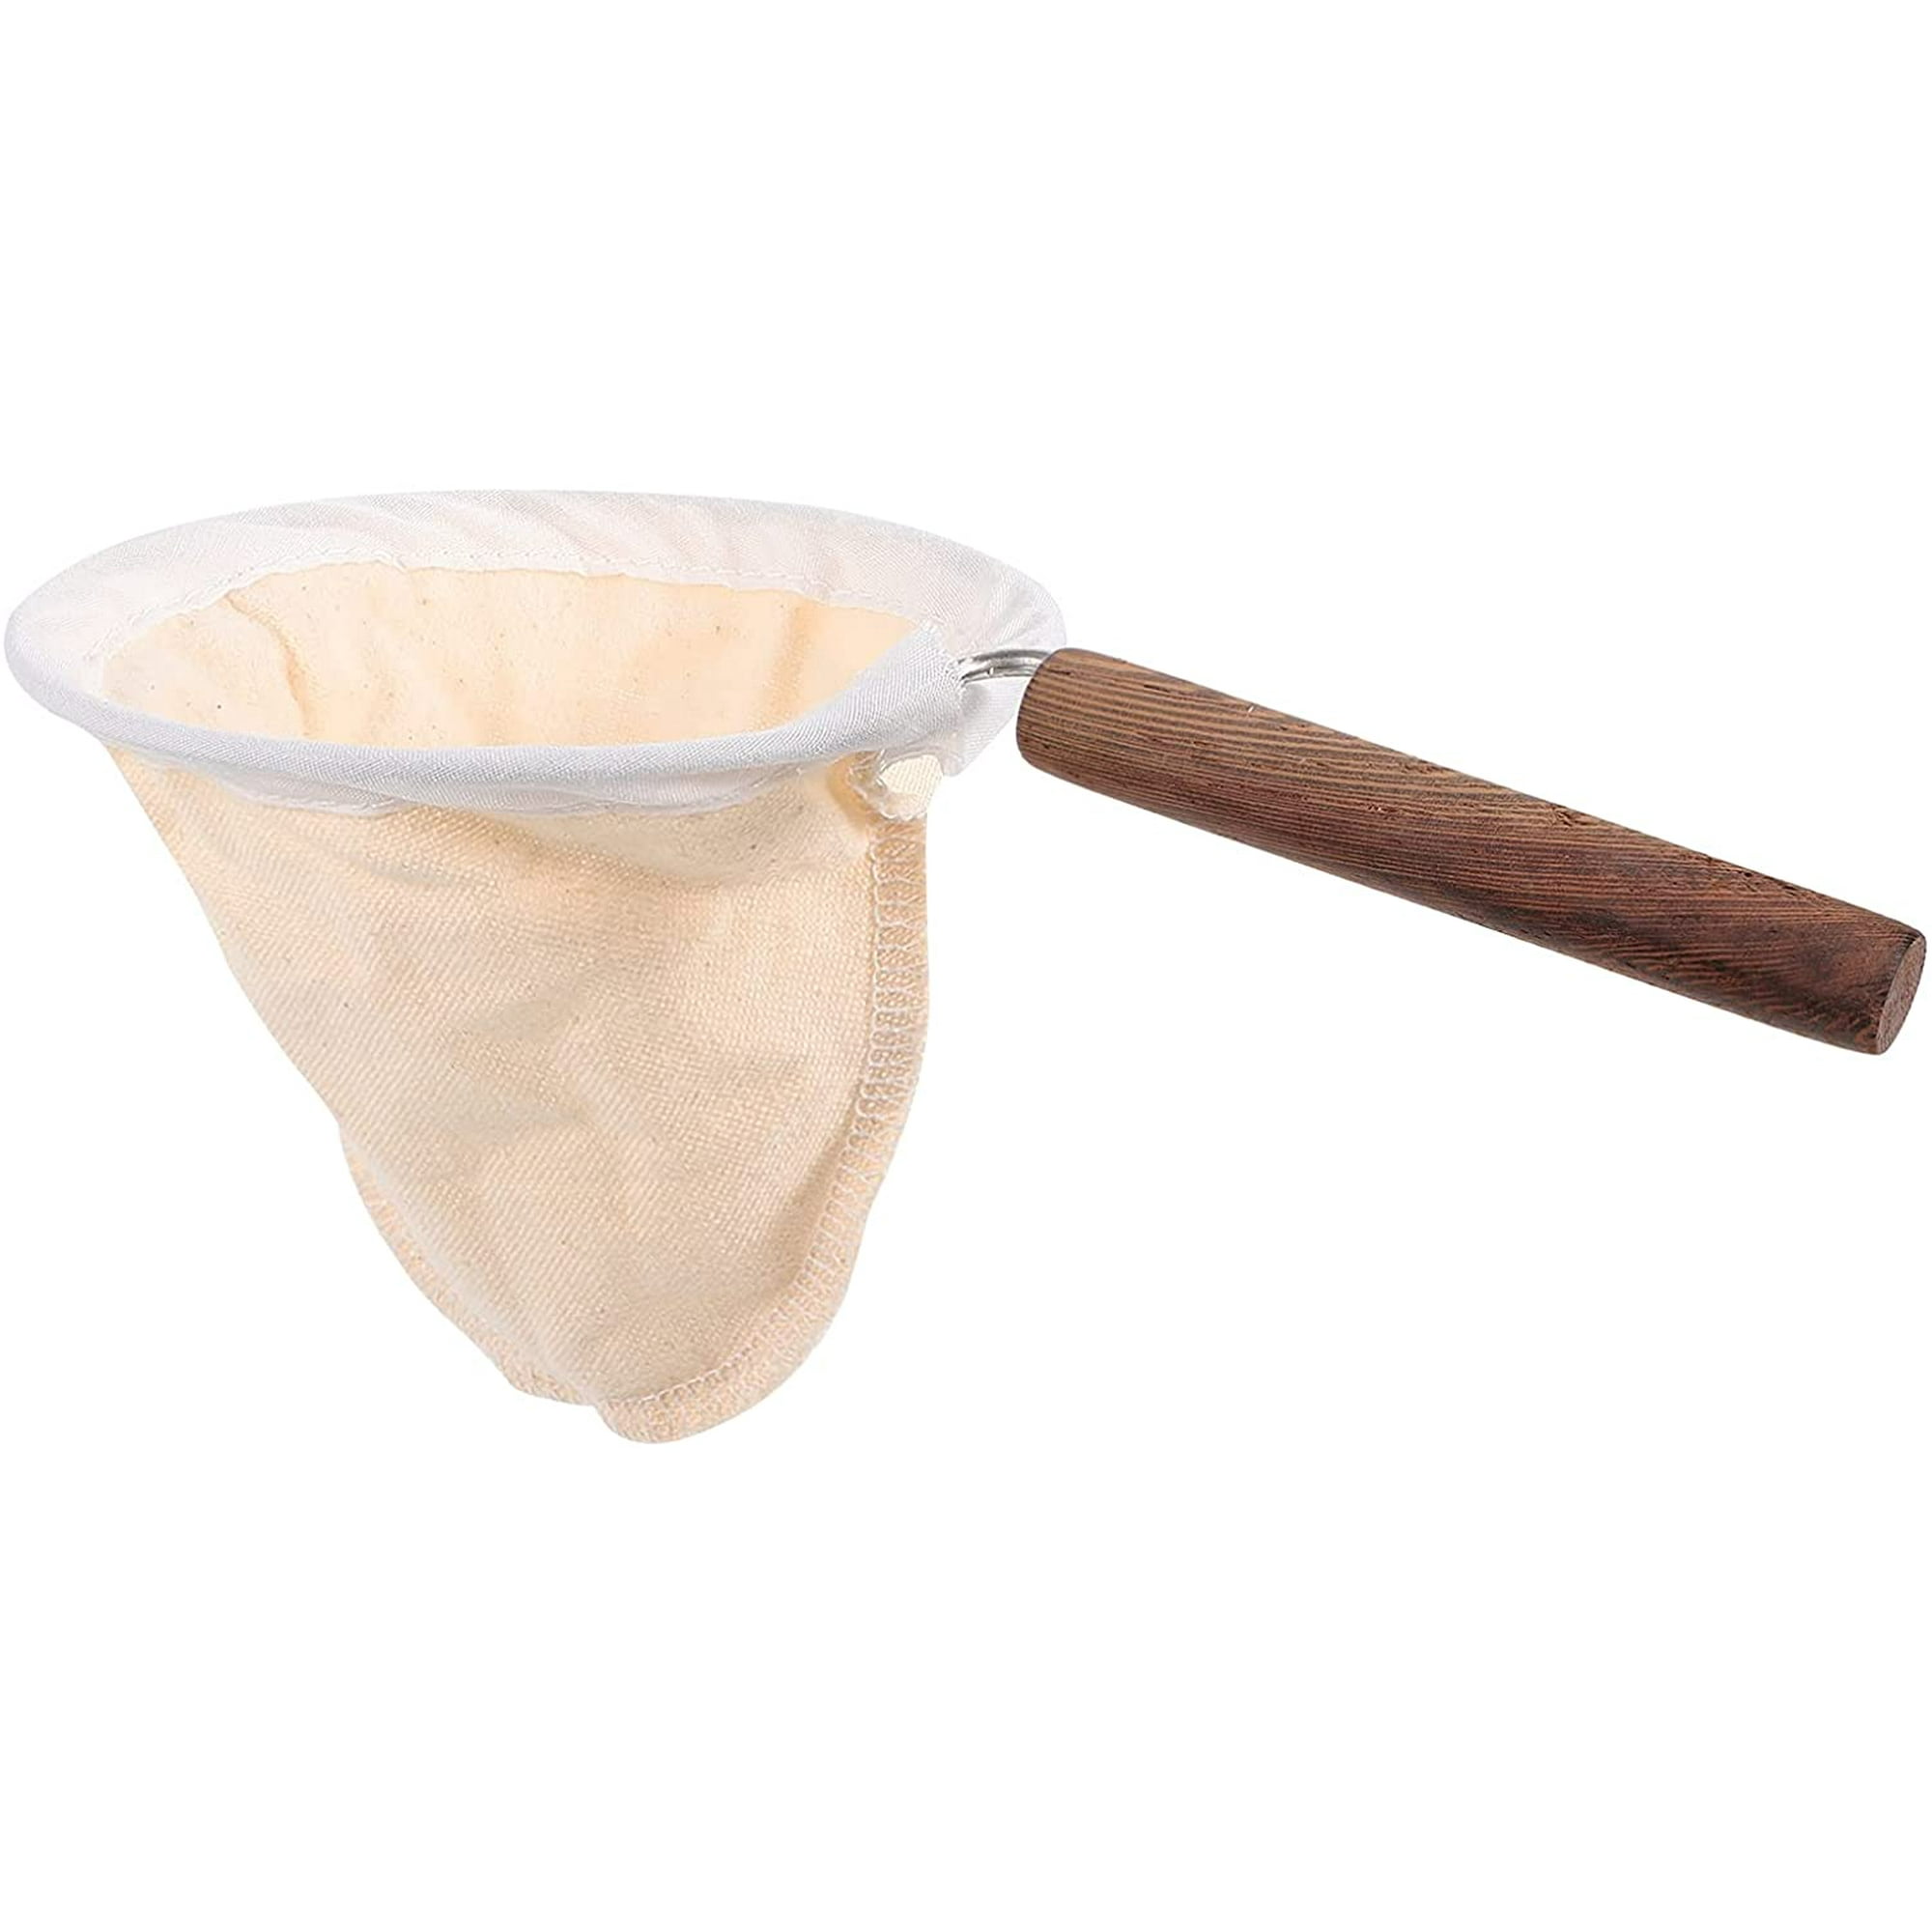 Coffee Filter With Wooden Handle Detachable Tea Filter Bag Reusable Strainer ONY